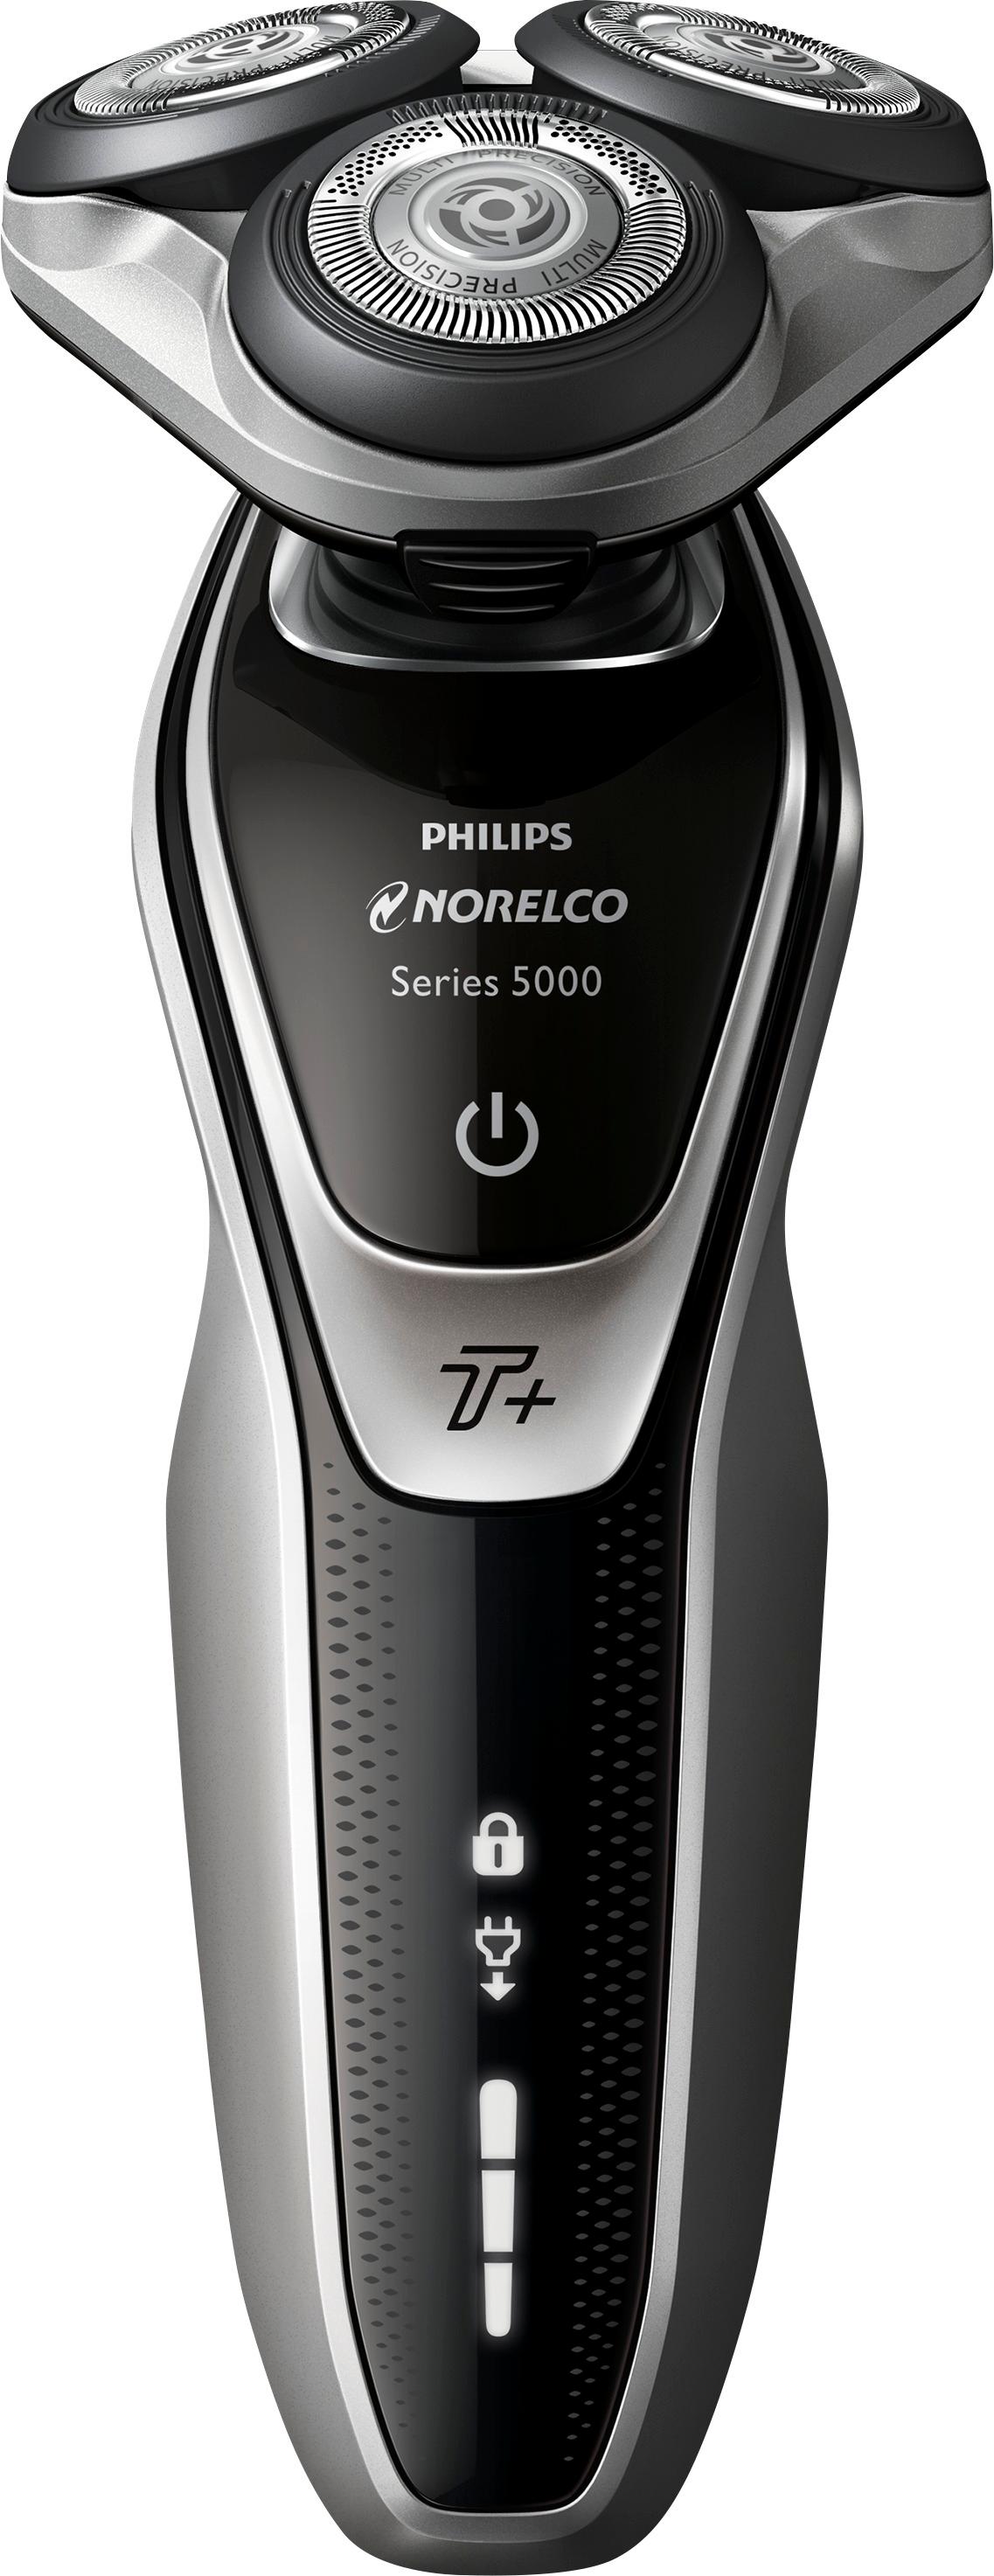 philips norelco series 5000 review